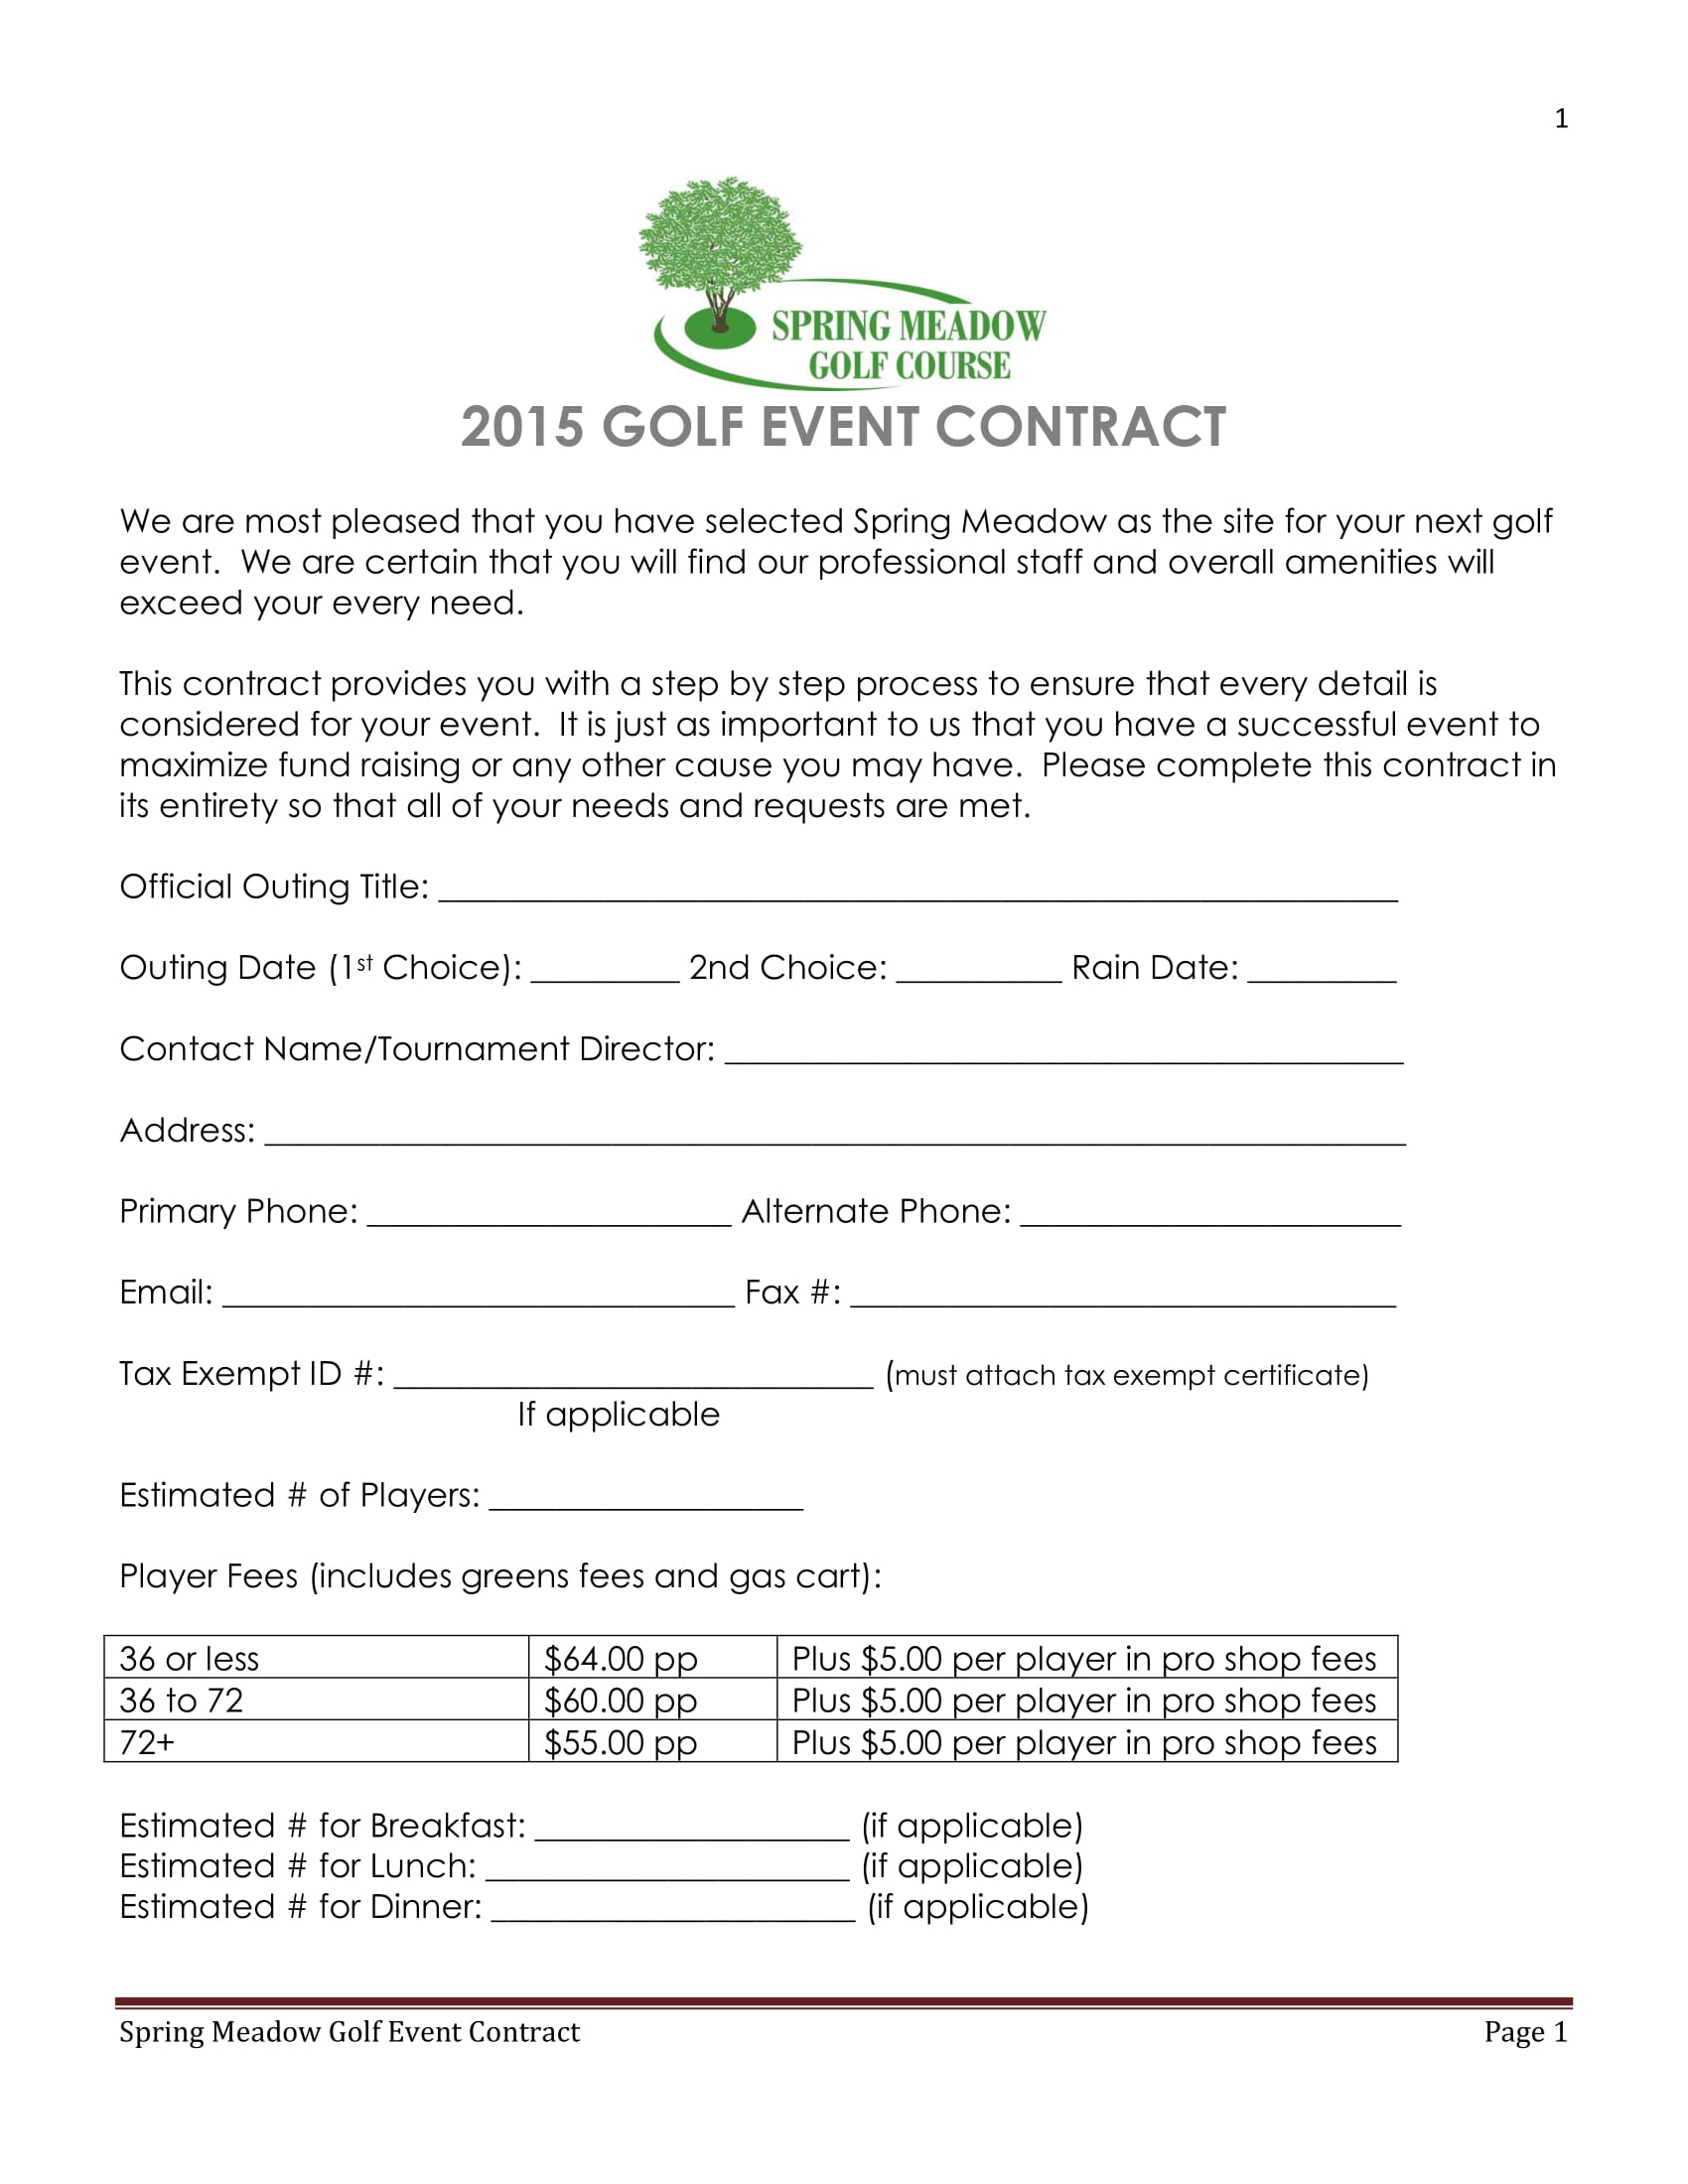 golf event contract form 1